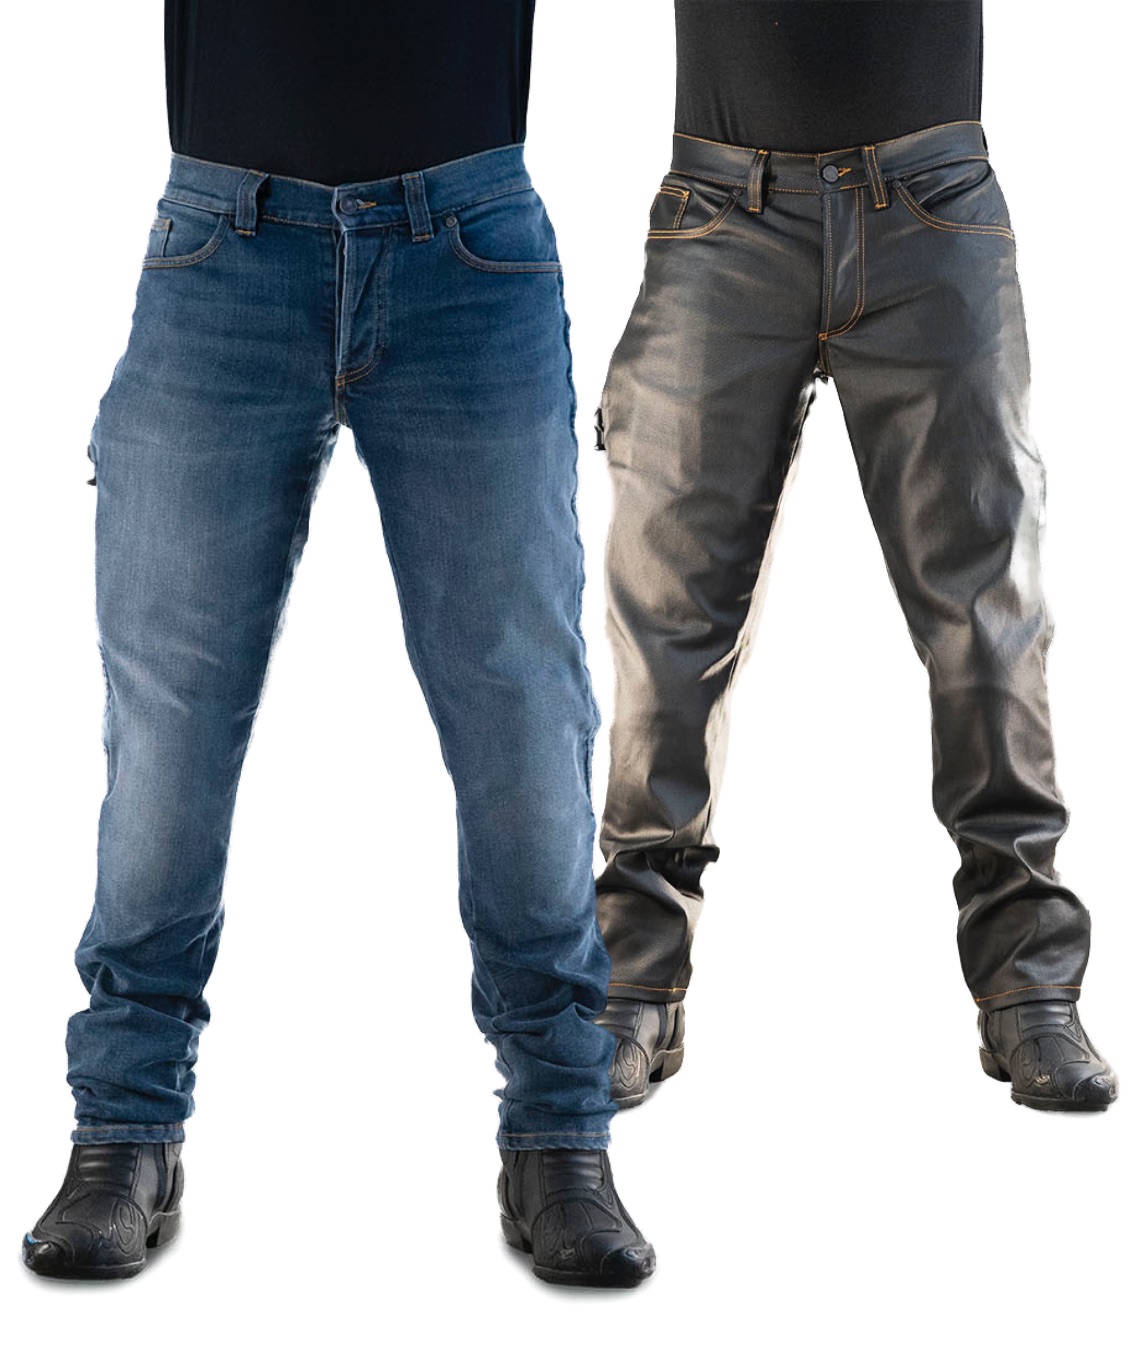 mo'cycle's airbag jeans inflate to protect the lower body from